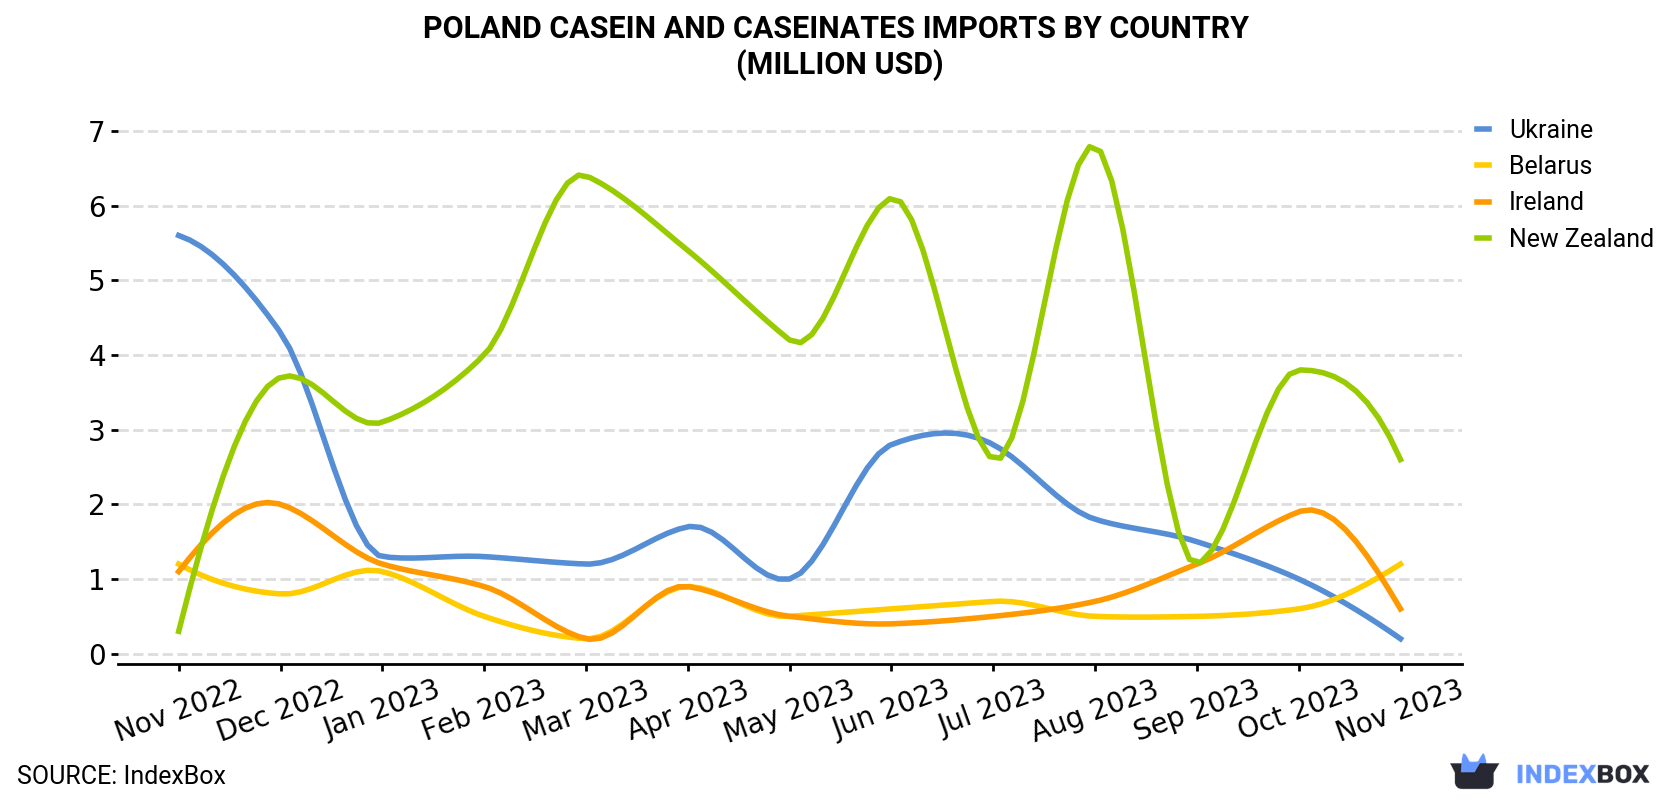 Poland Casein And Caseinates Imports By Country (Million USD)